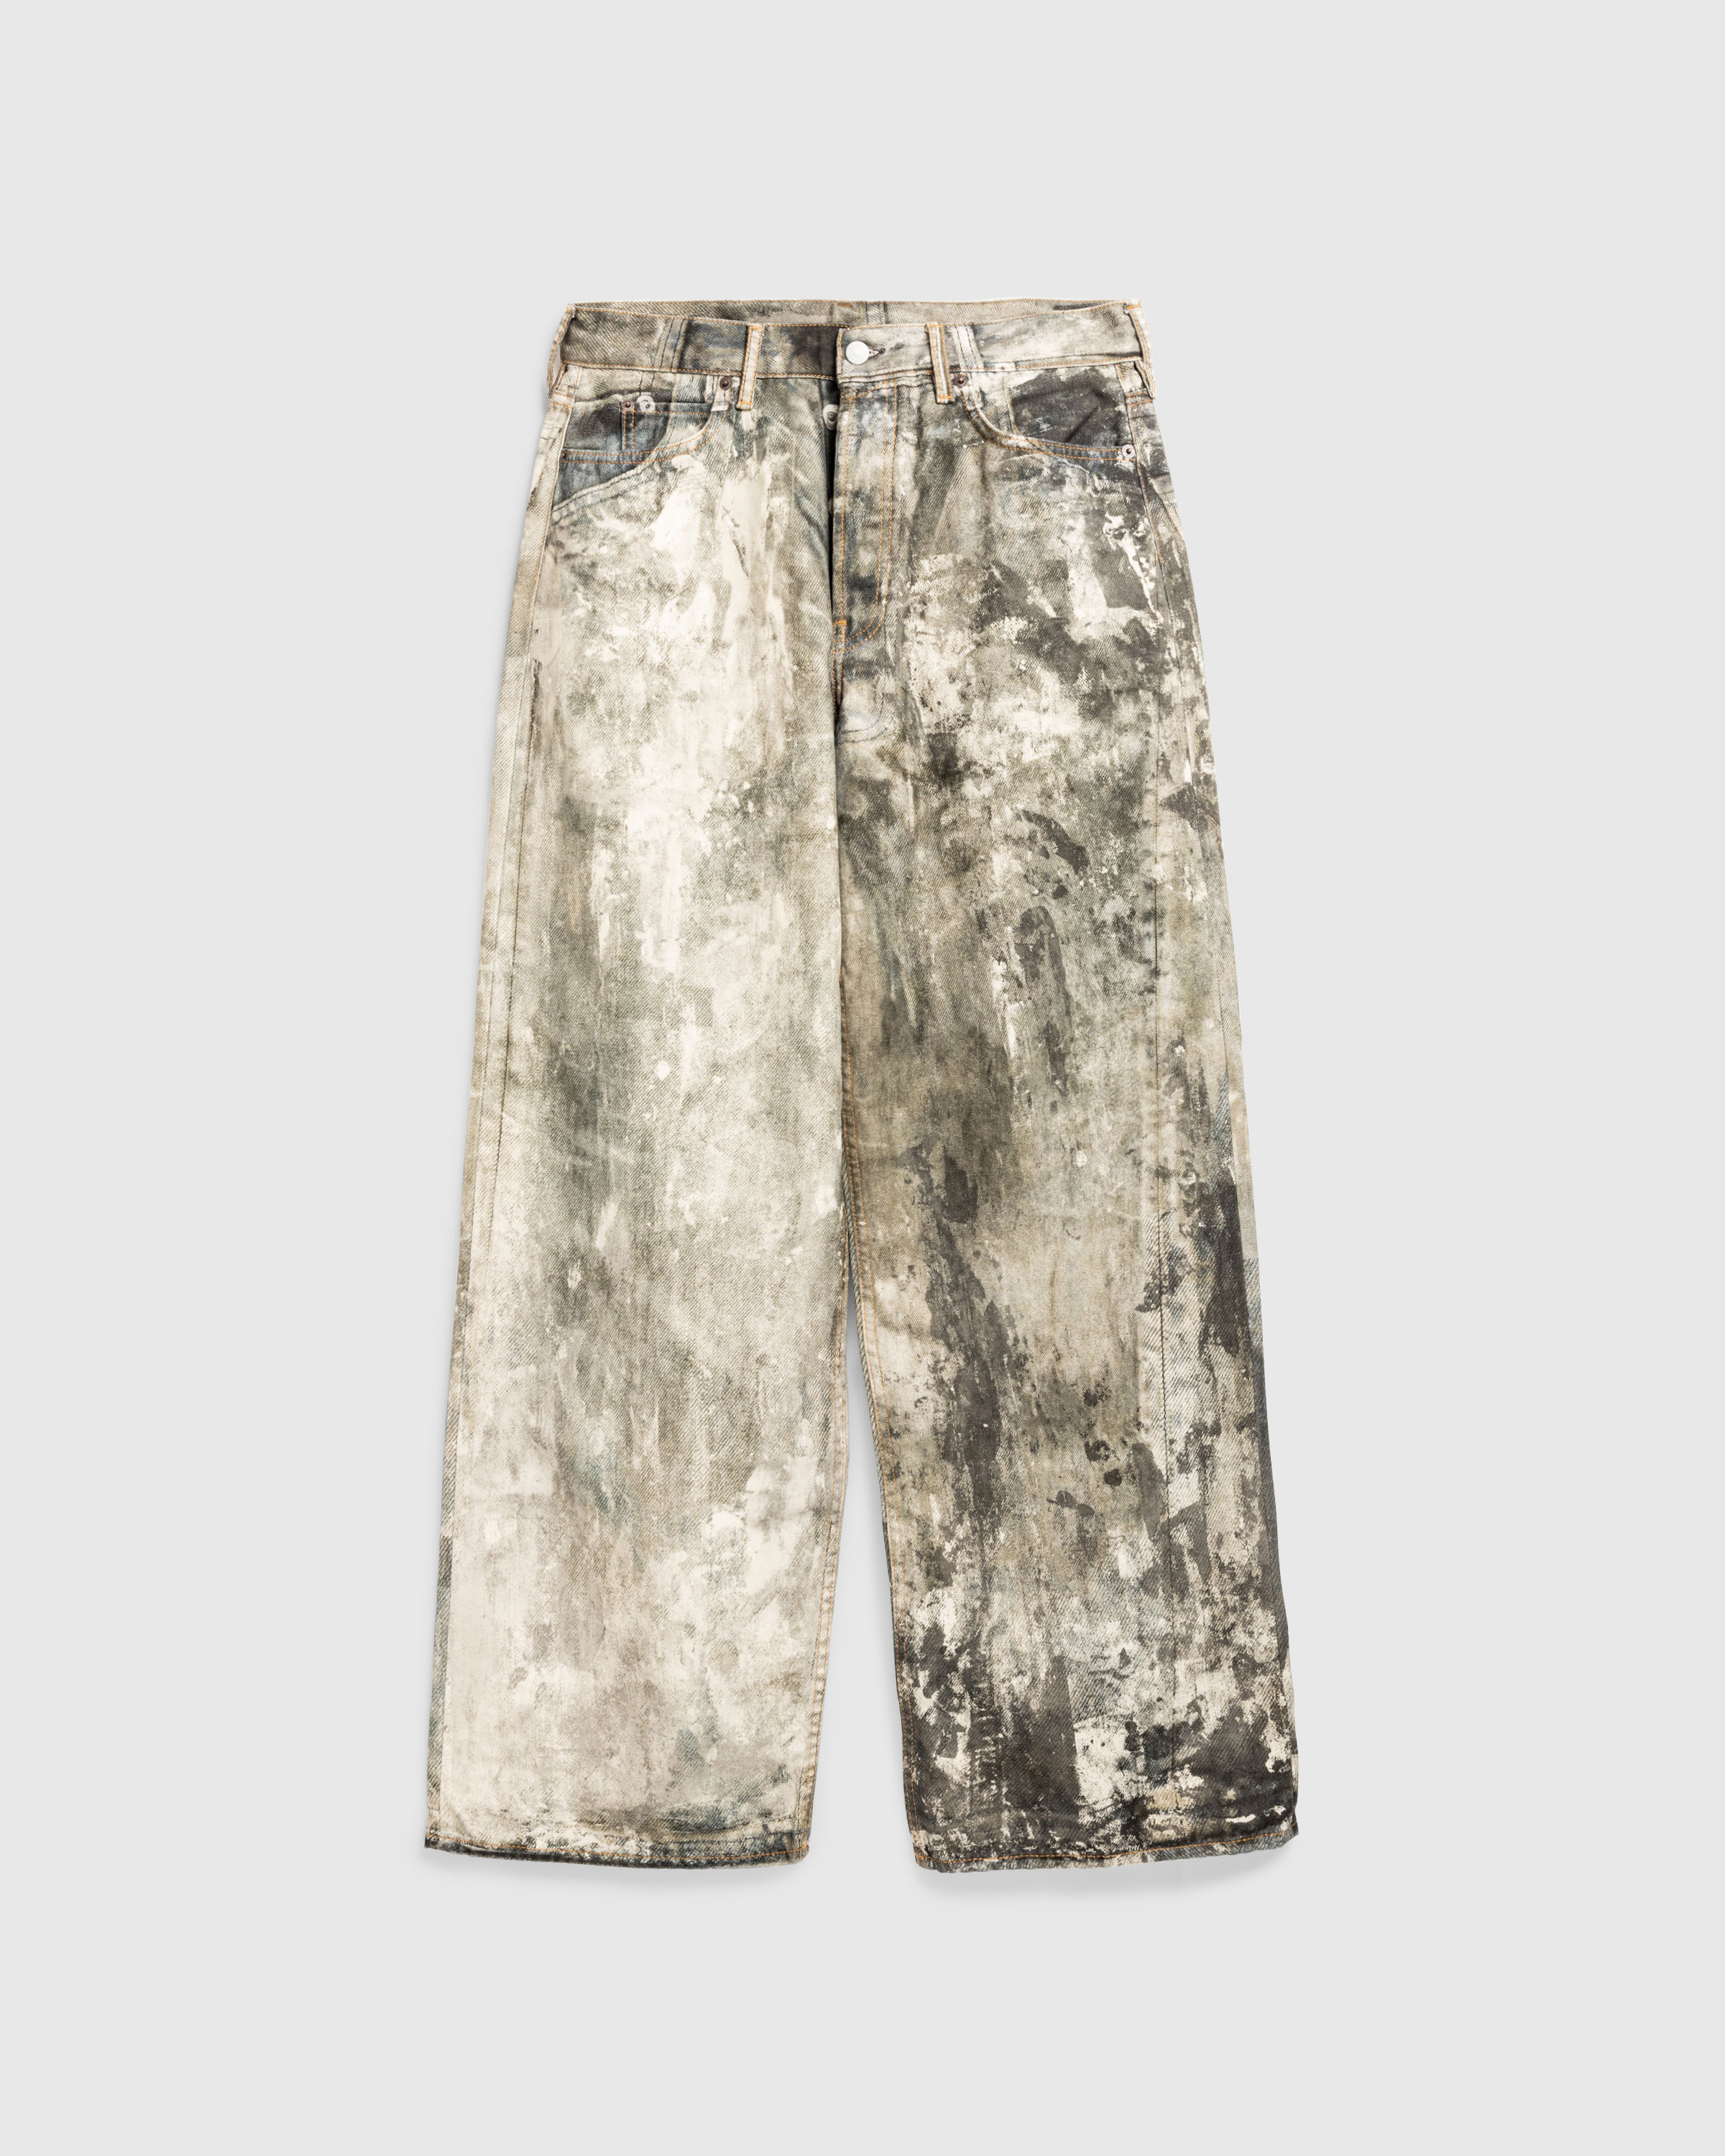 Acne Studios – Loose Fit Trousers 1981M Cold Grey - Pants - Grey - Image 1